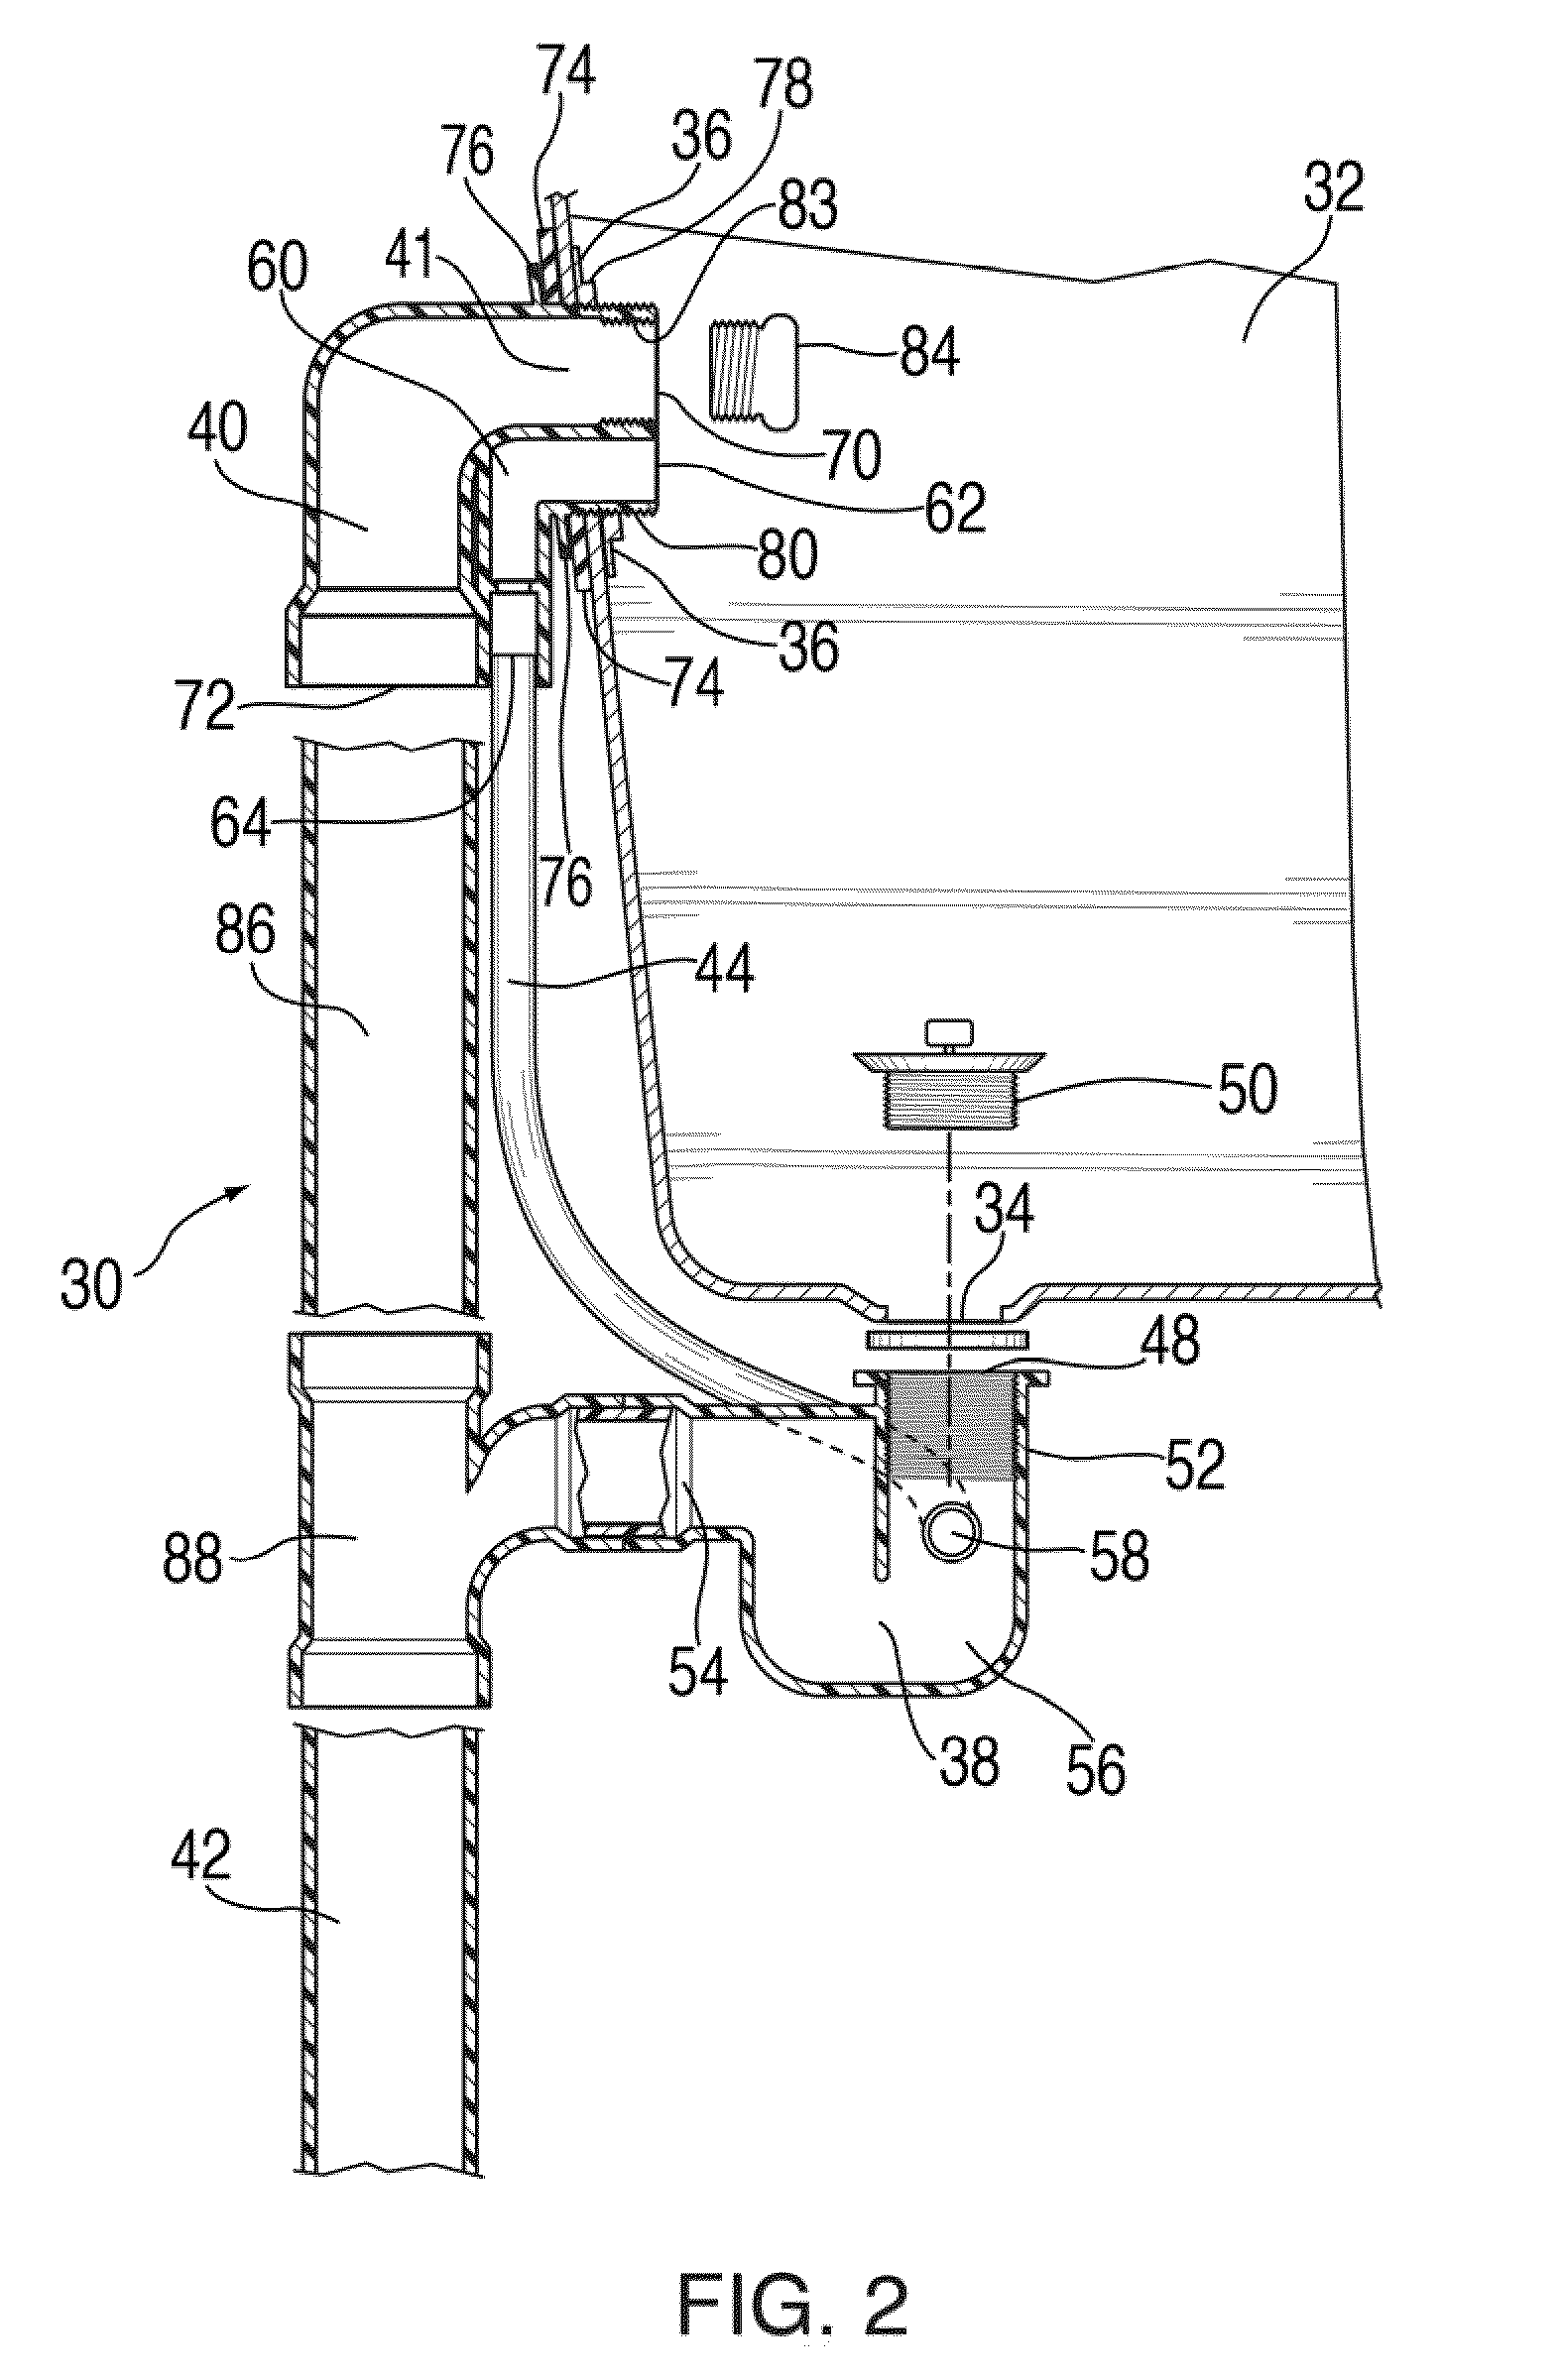 Tub drain and overflow assembly